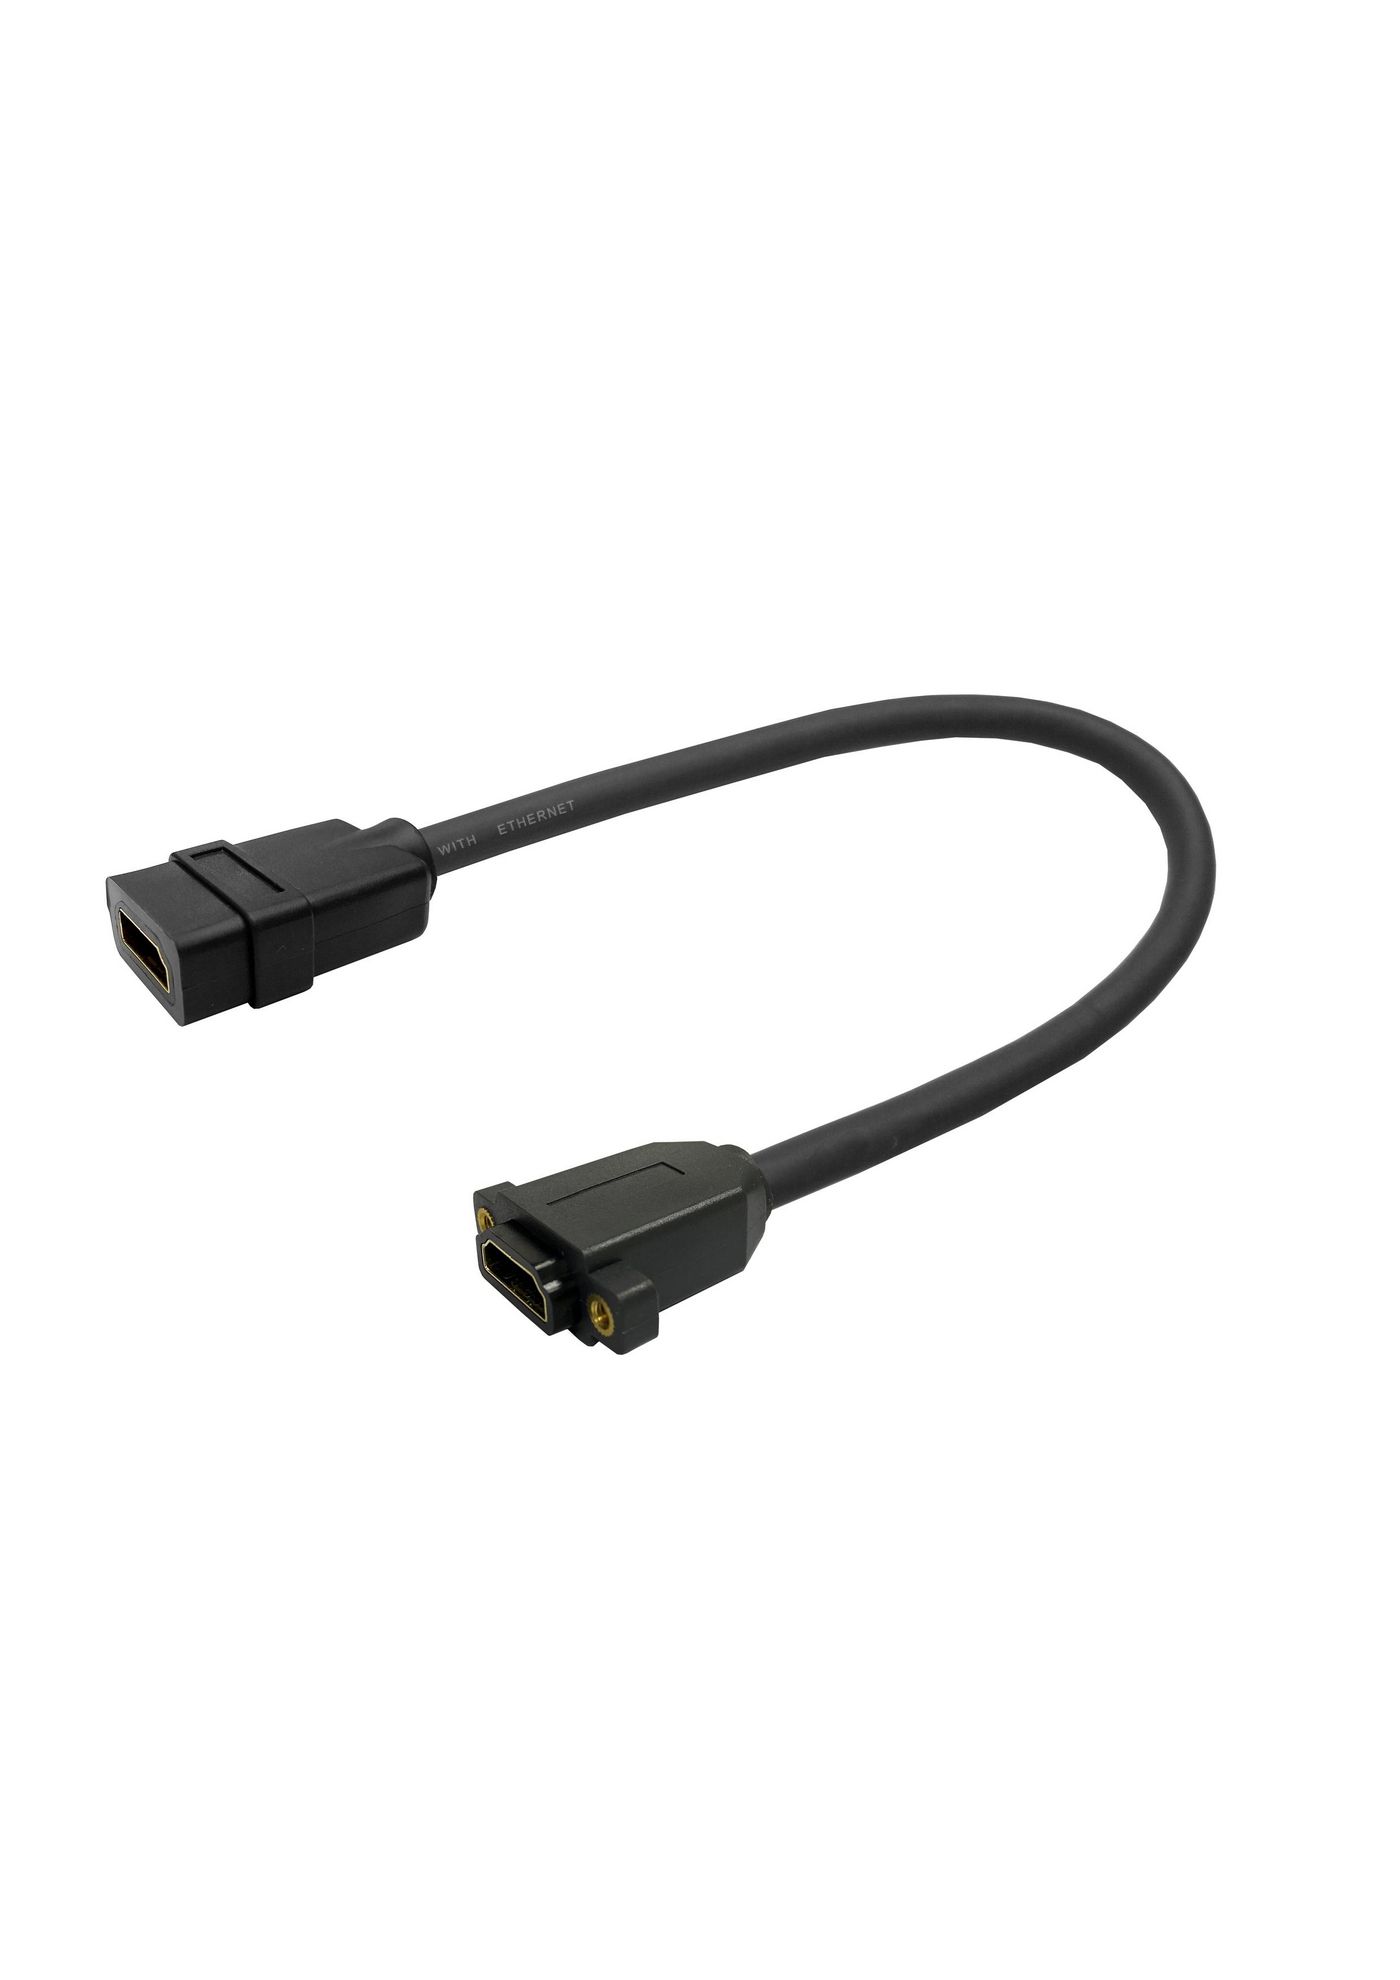 Pro HDMI Cable F/F for